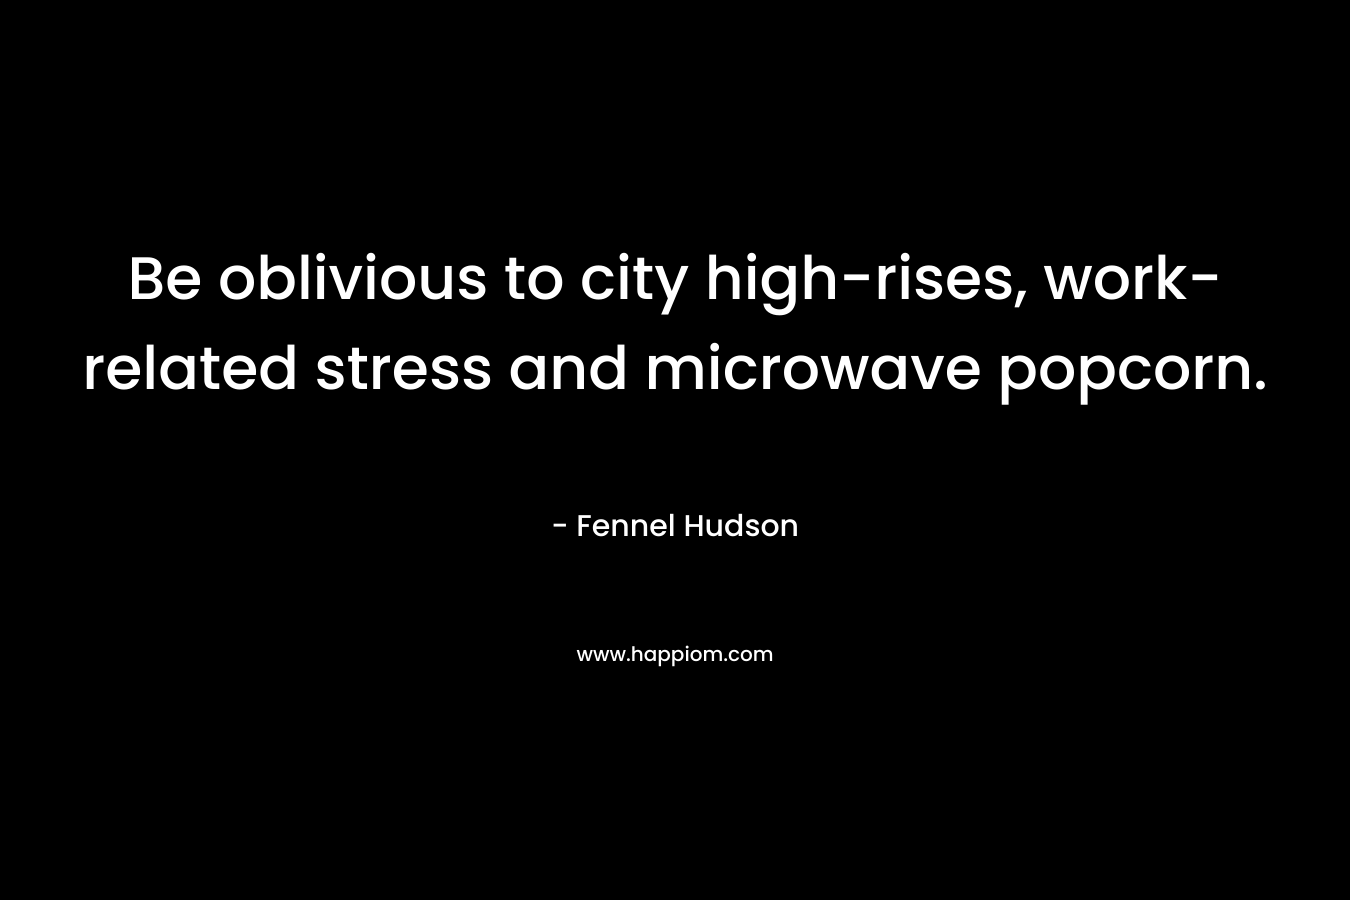 Be oblivious to city high-rises, work-related stress and microwave popcorn.